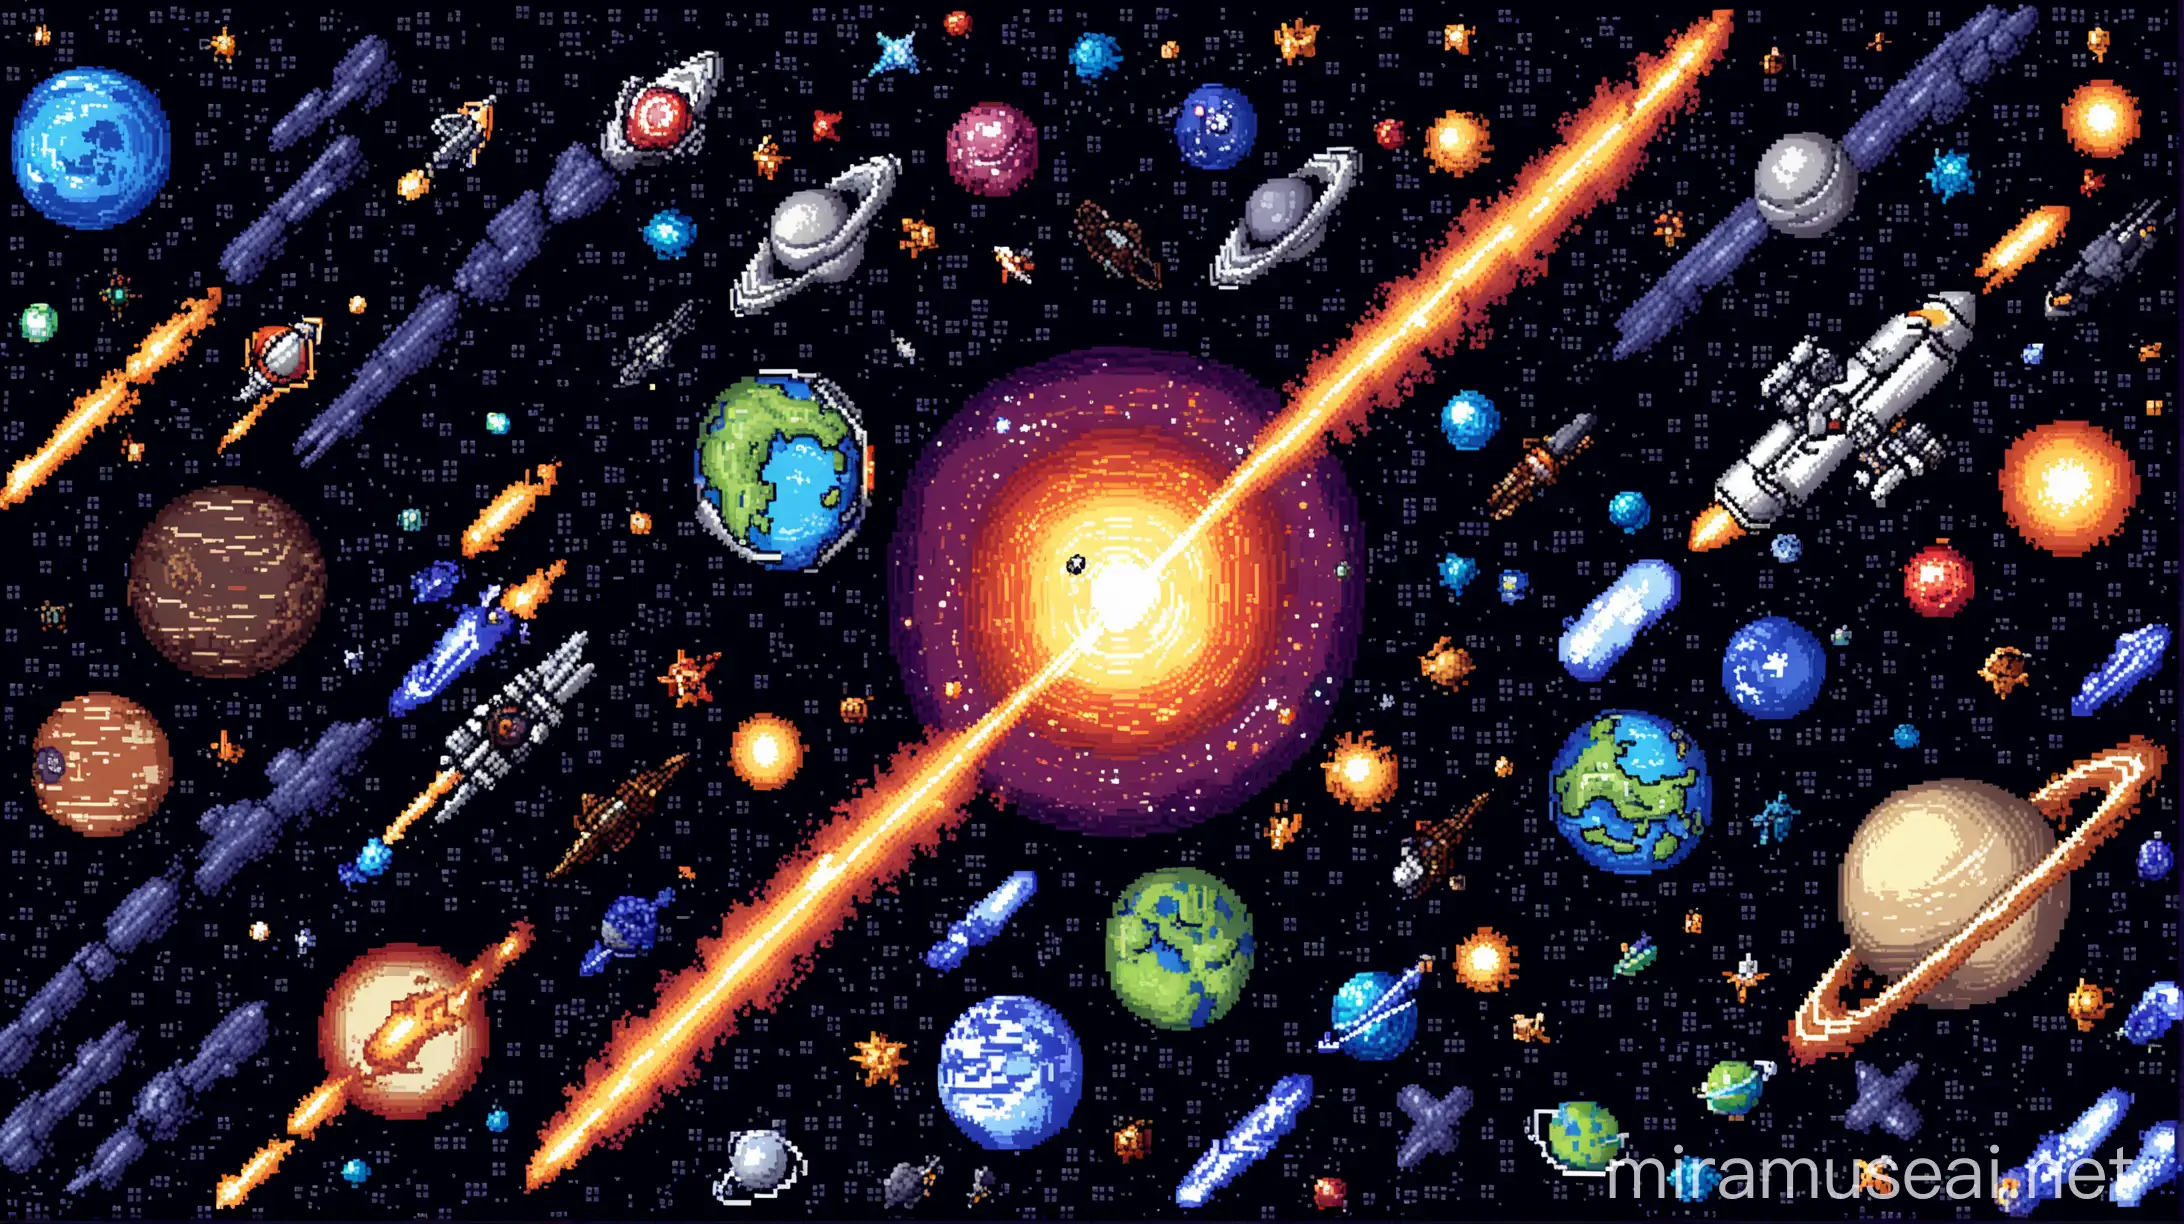 generate a 1920x1080 image in space galaxy with some meteors spaceships planets and use pixelart. I need the image as a game menu background